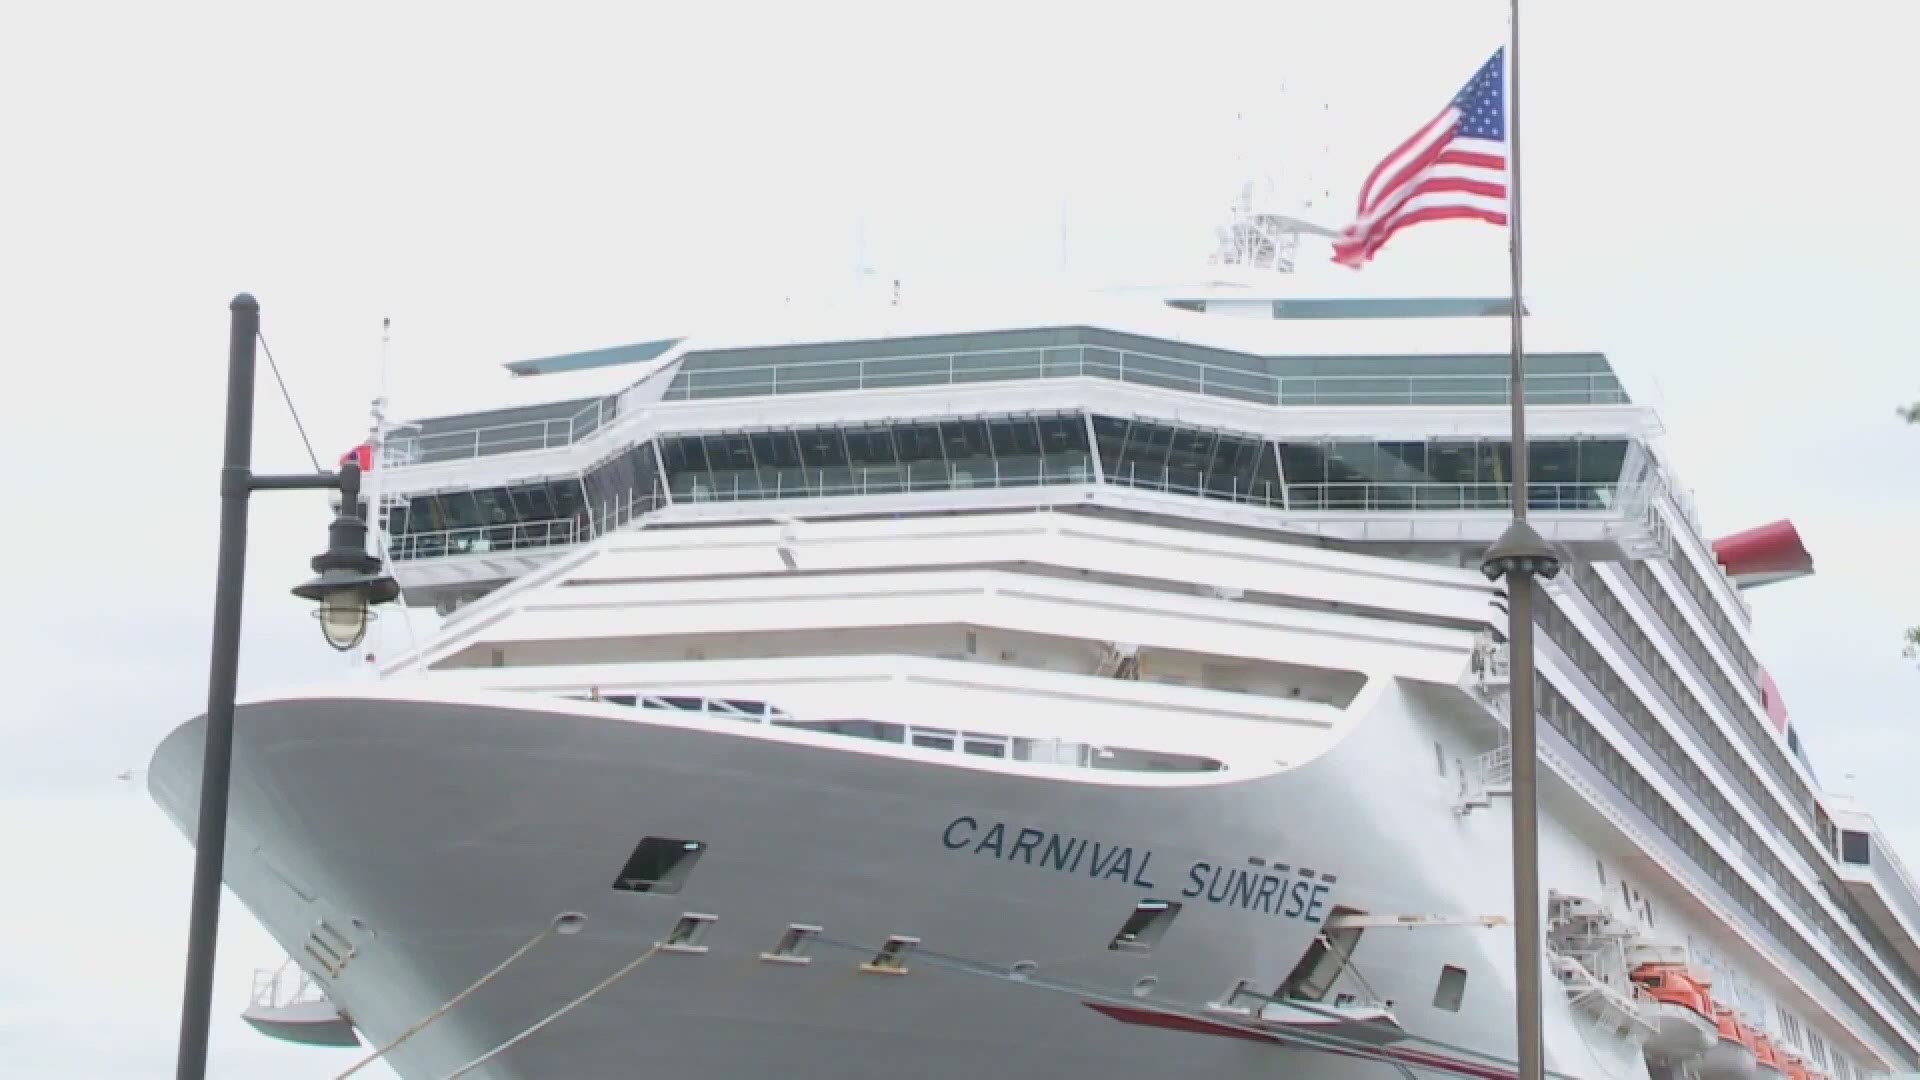 The deal with Carnival Cruise Line and the City of Norfolk is still on. Carnival’s president joined business leaders Thursday to inform them bookings are taking off!